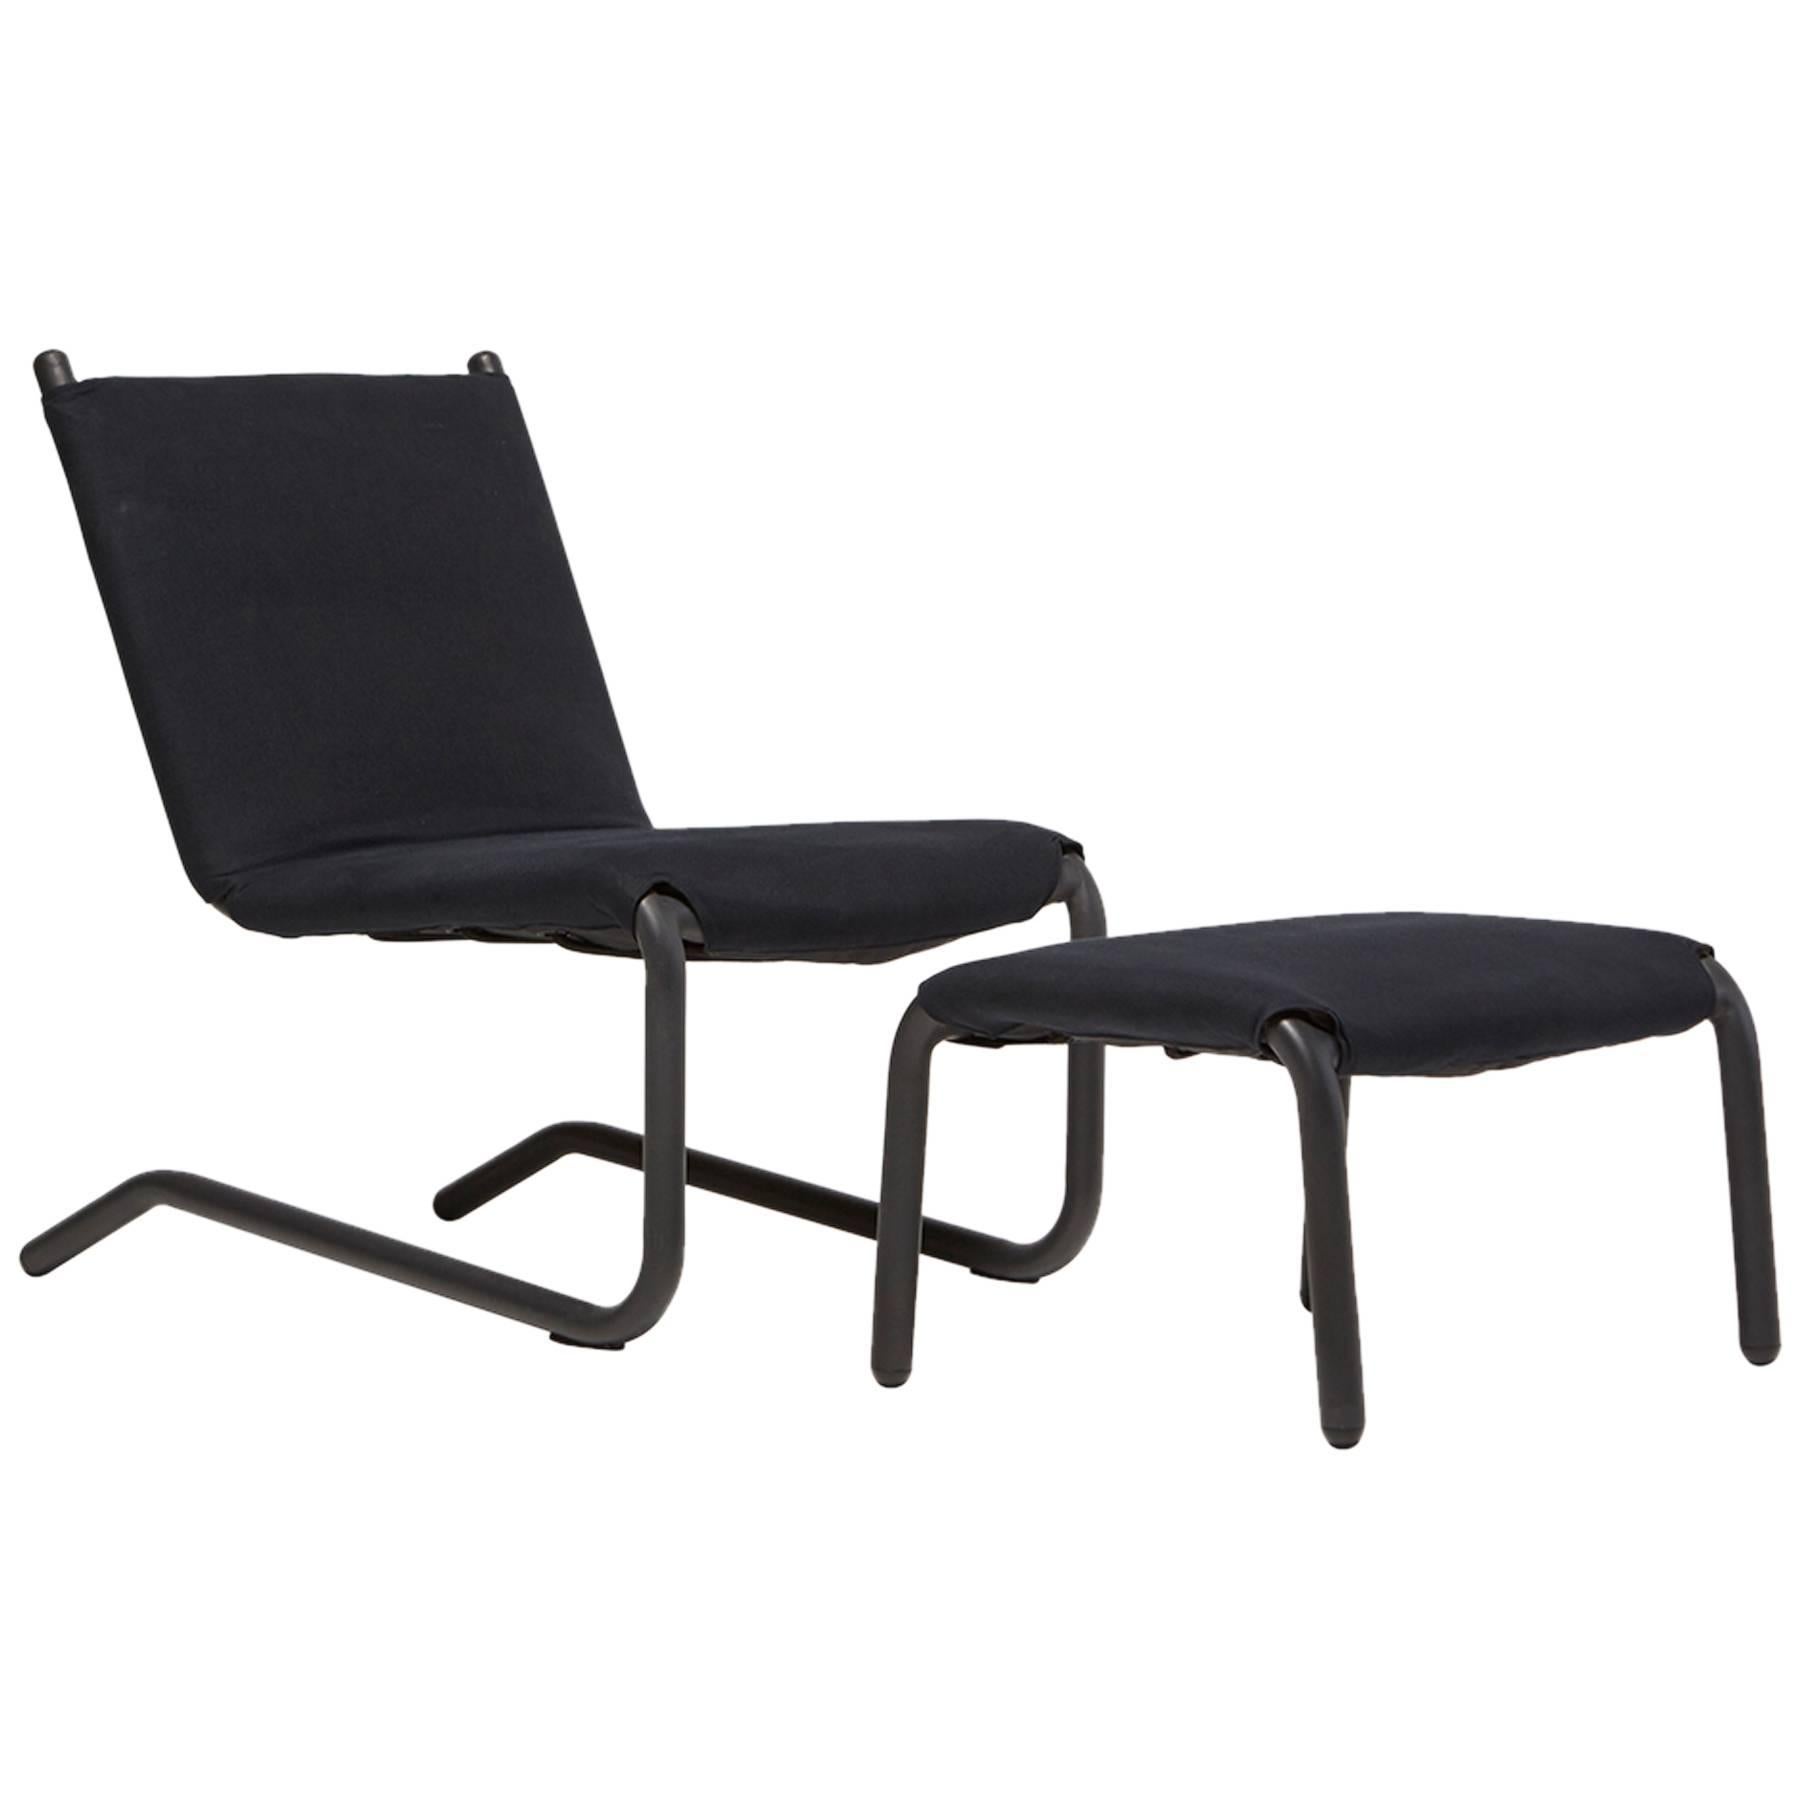 Bowline Chair and Ottoman in Black Canvas - In Stock